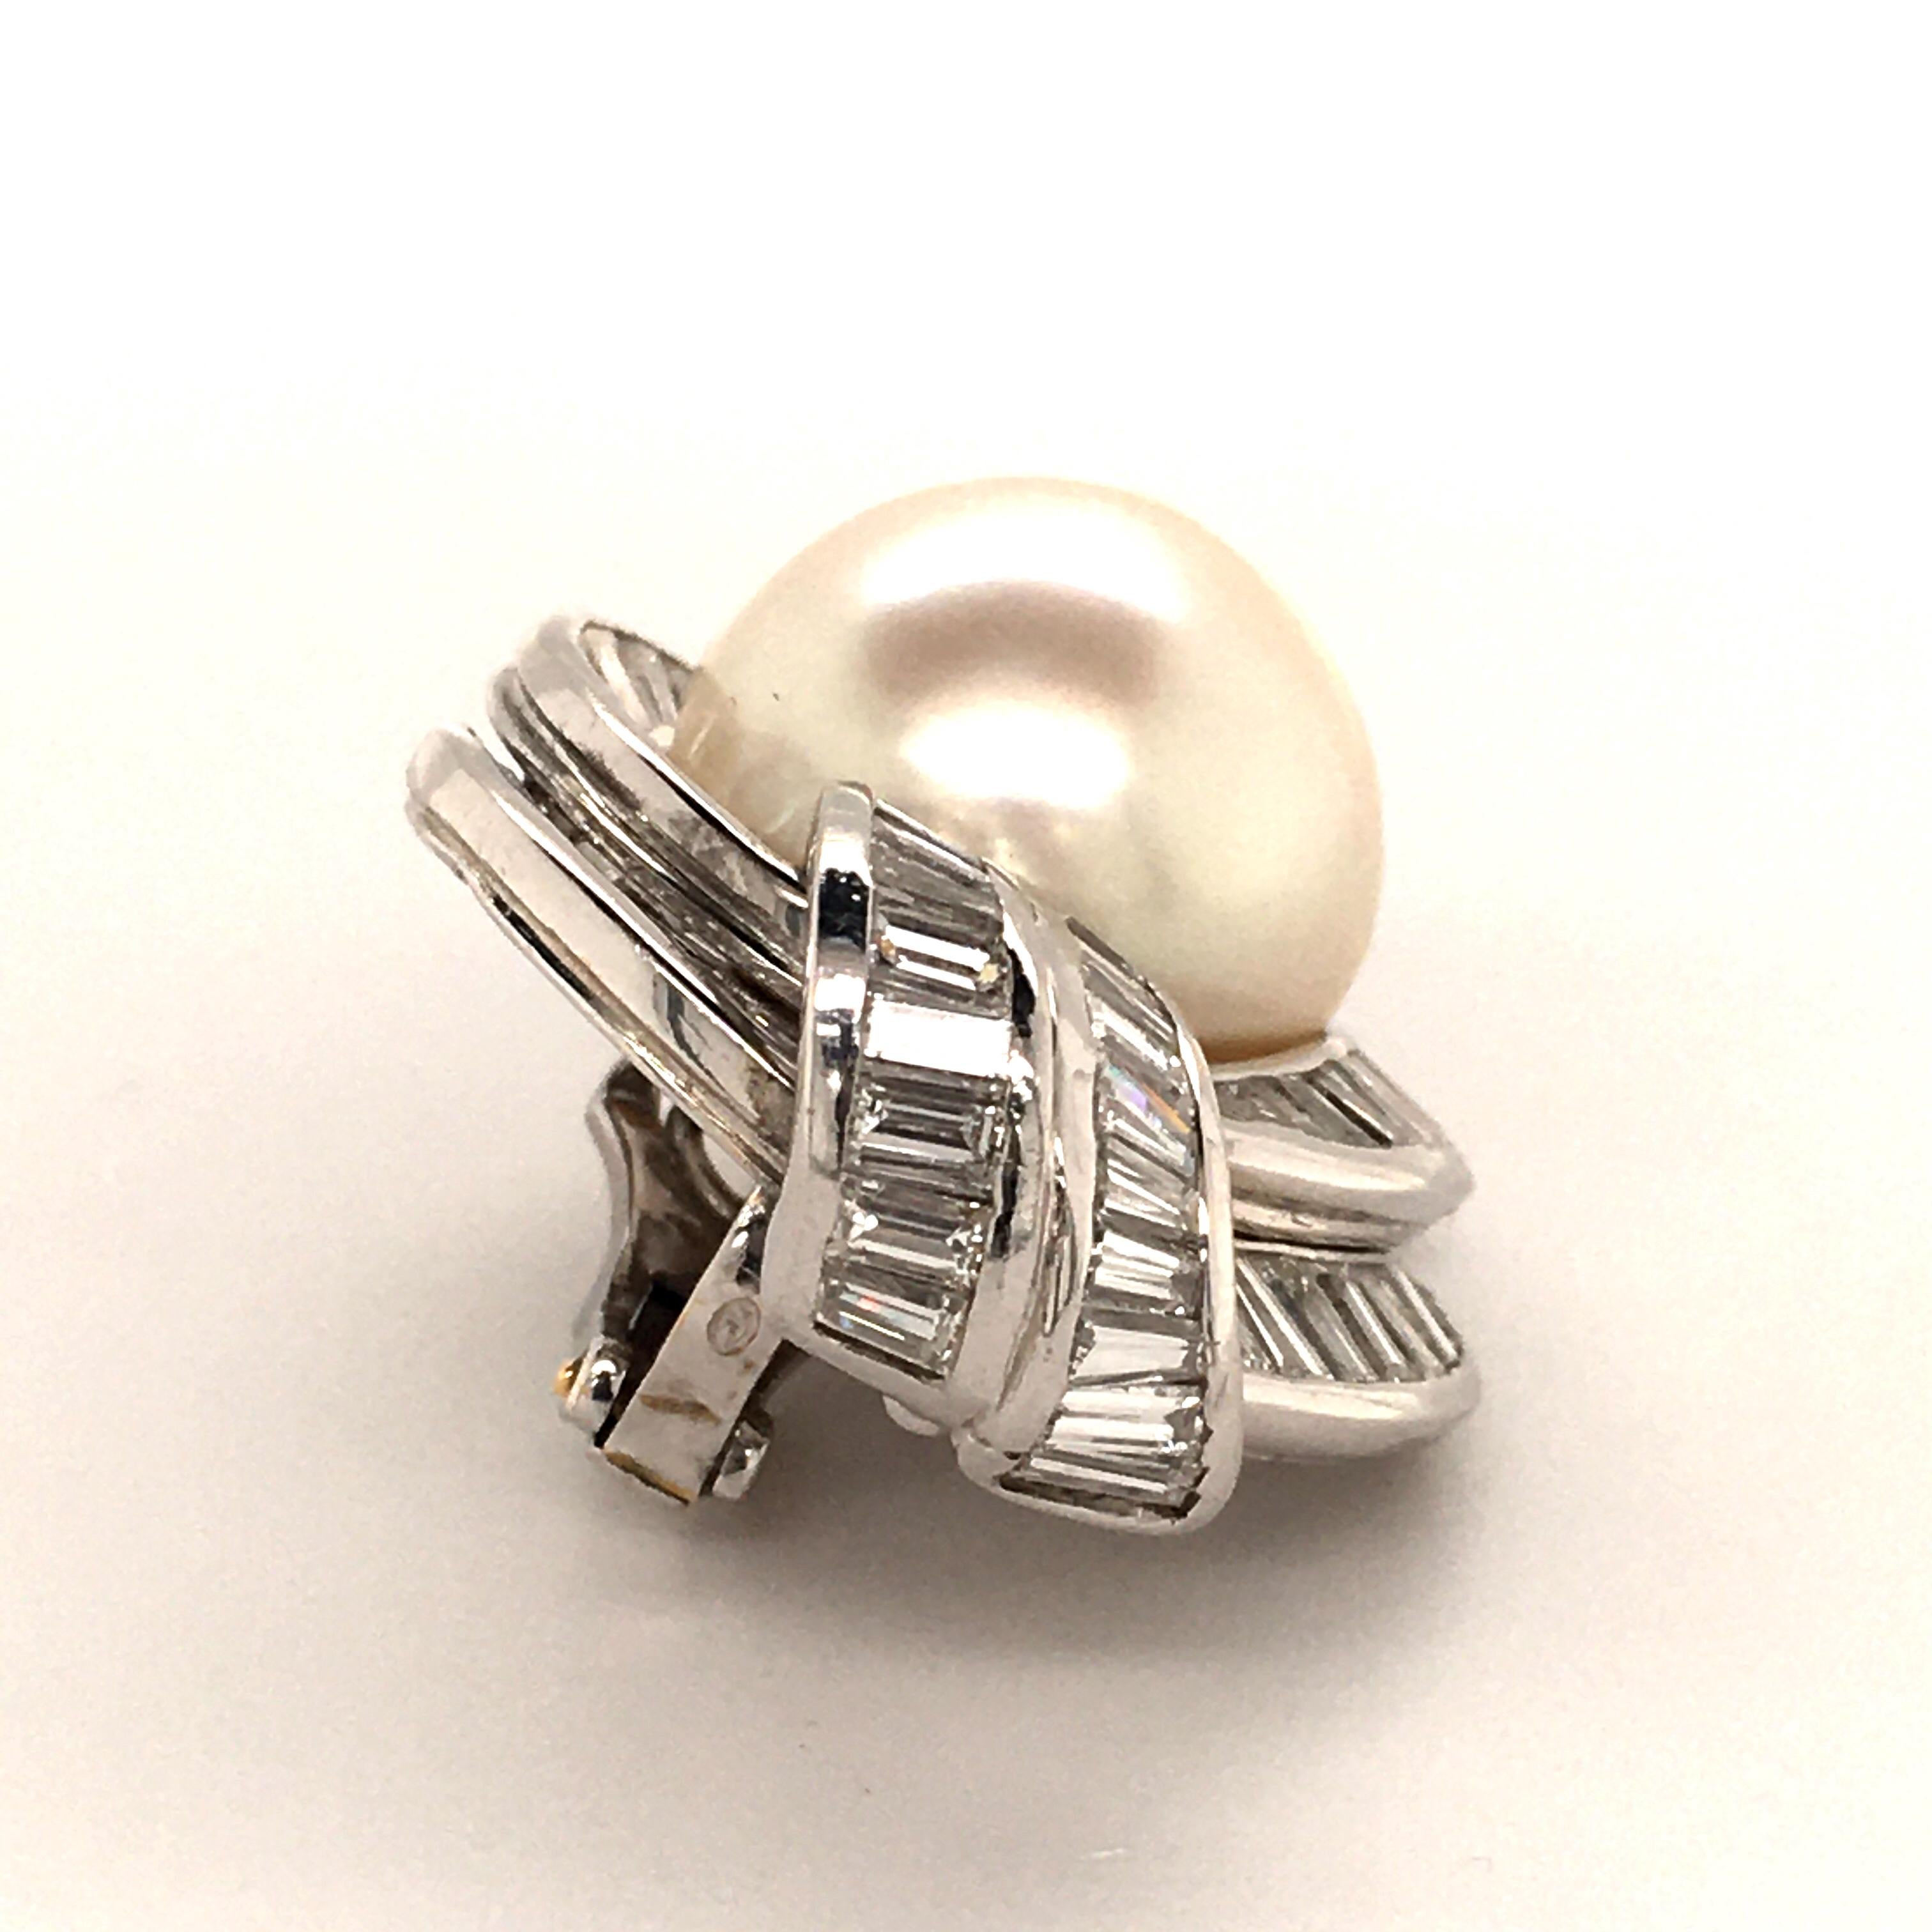 Stunning South Sea Cultured Pearls Earrings in White Gold 750 with Diamonds For Sale 1